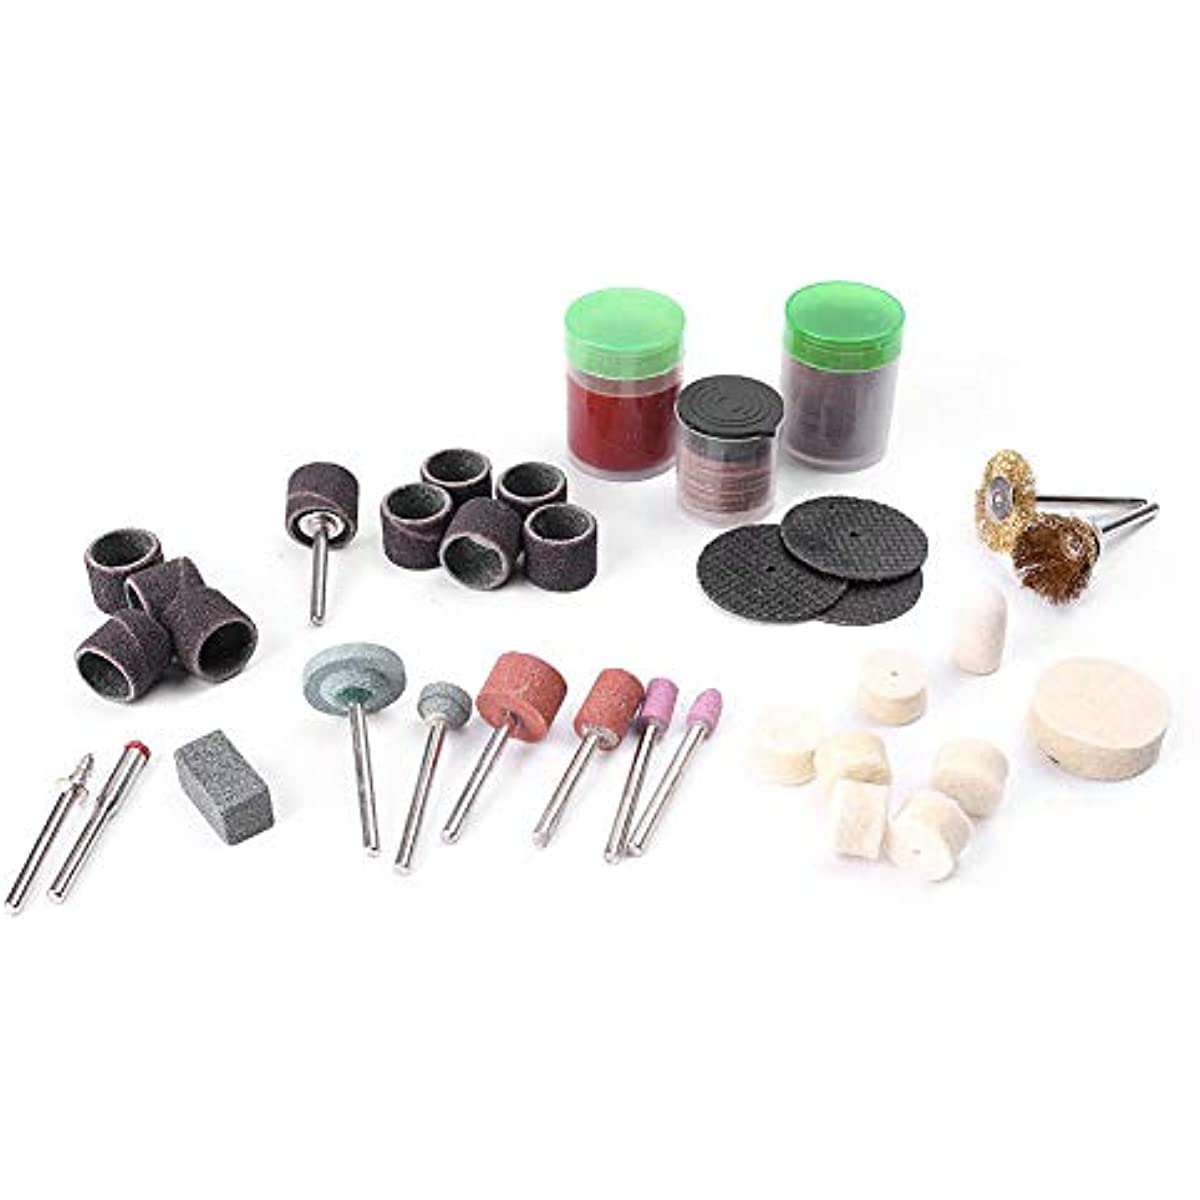 105Pcs Rotary Tool Accessories Set, Electric Grinding Attachment Kit, Multi  Rotary Tool Accessories Set, Grinding Polishing Drilling Kit Fit for